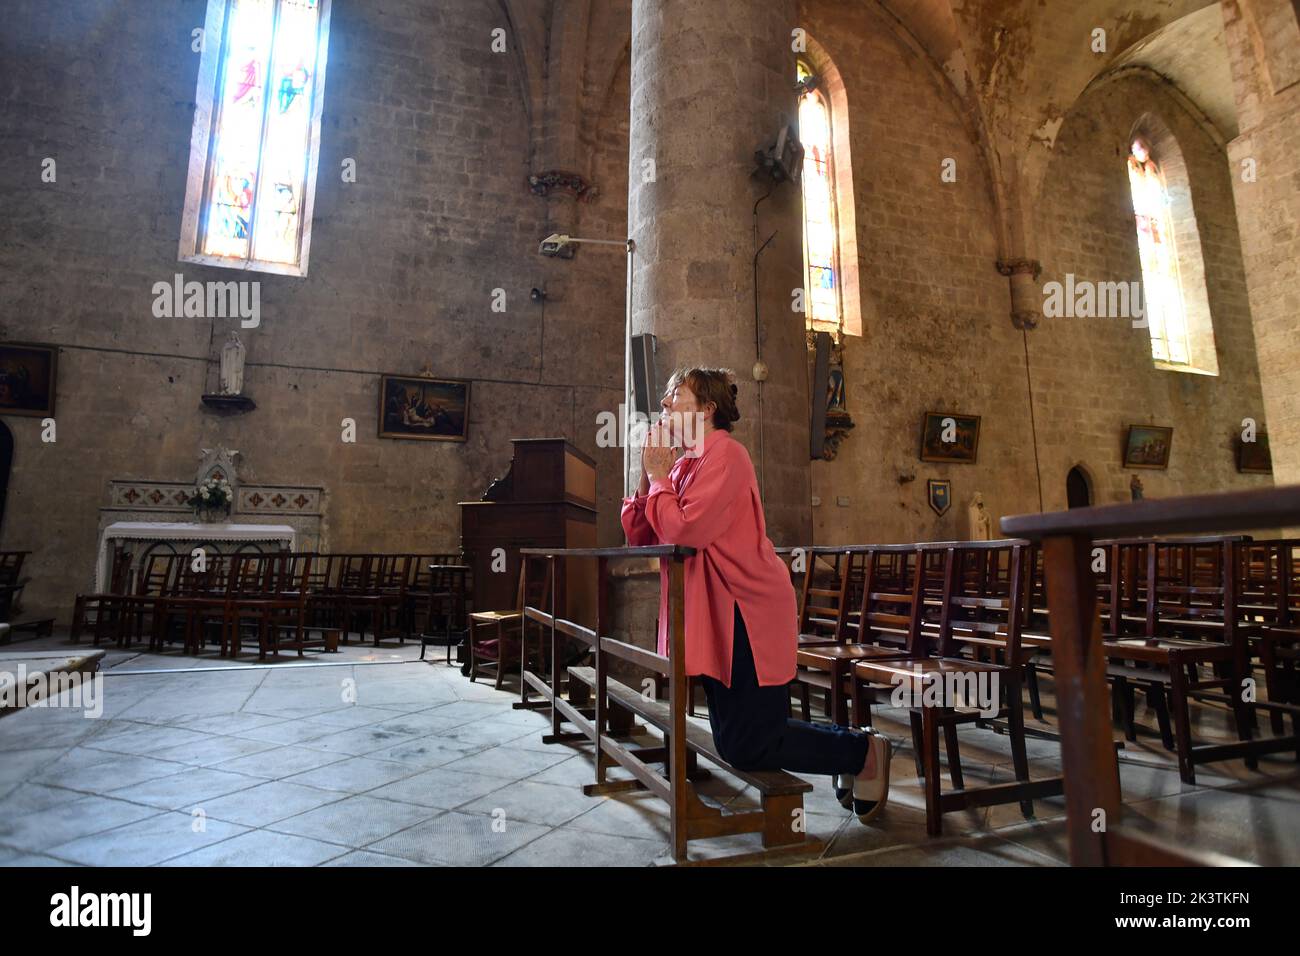 Christian woman praying in Church of Sainte-Marie in Montreal in the Lot-et-Garonne department, Southwestern France. Montréal-du-Gers. Church of Sainte-Marie. The church is on the Camino De Santiago route for pilgrims. Stock Photo